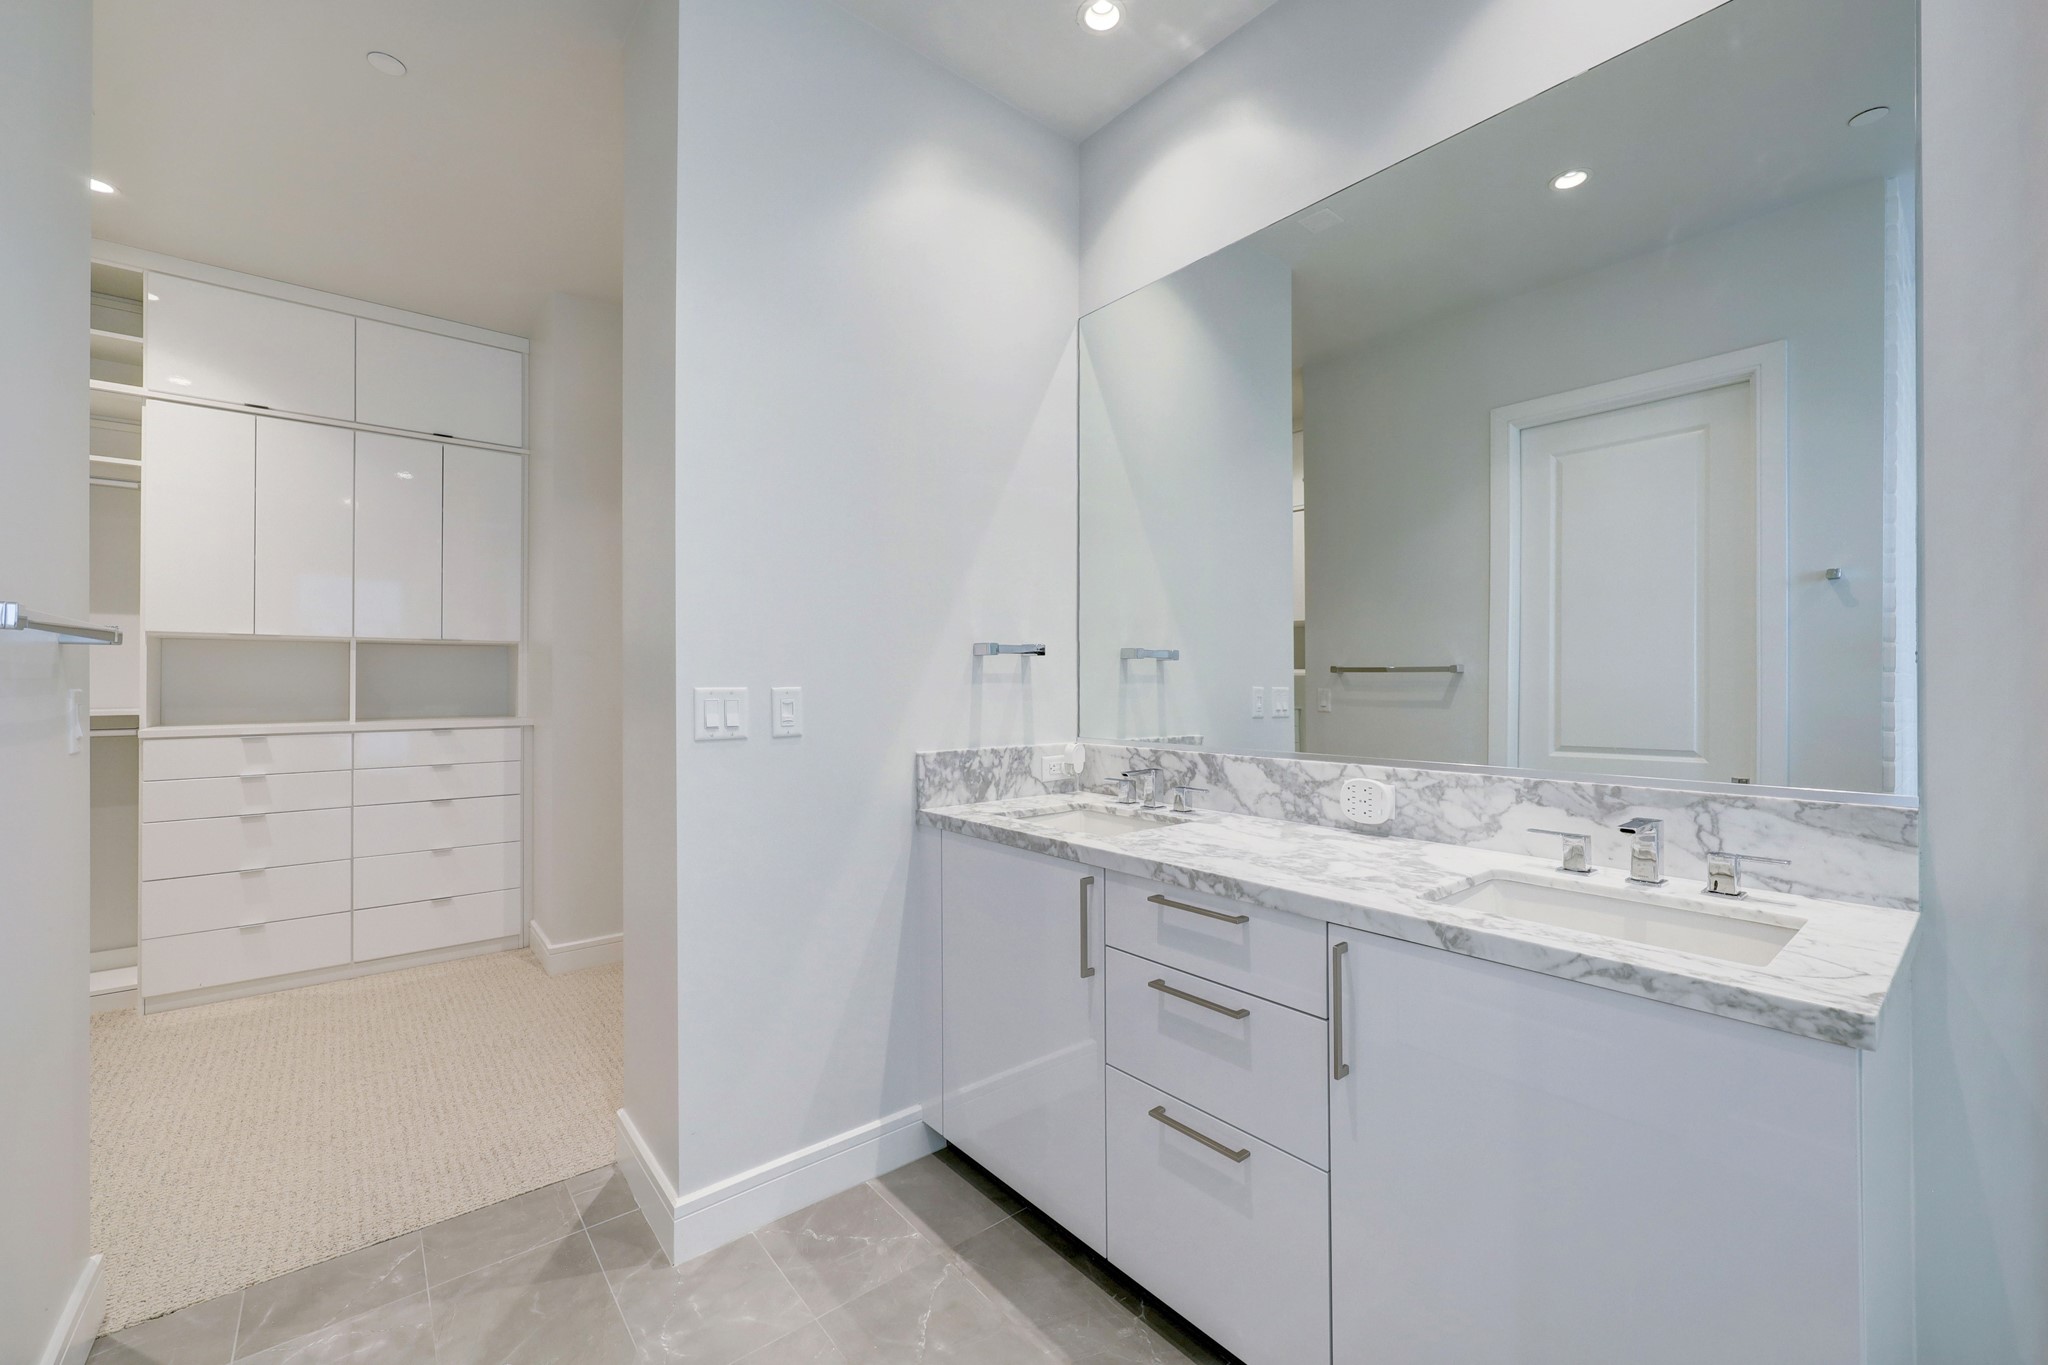 Primary Bathroom features tile floors, double vanity, large seamless glass shower and separate soaking tub. The bathroom leads to a walk-in closet with custom shelving